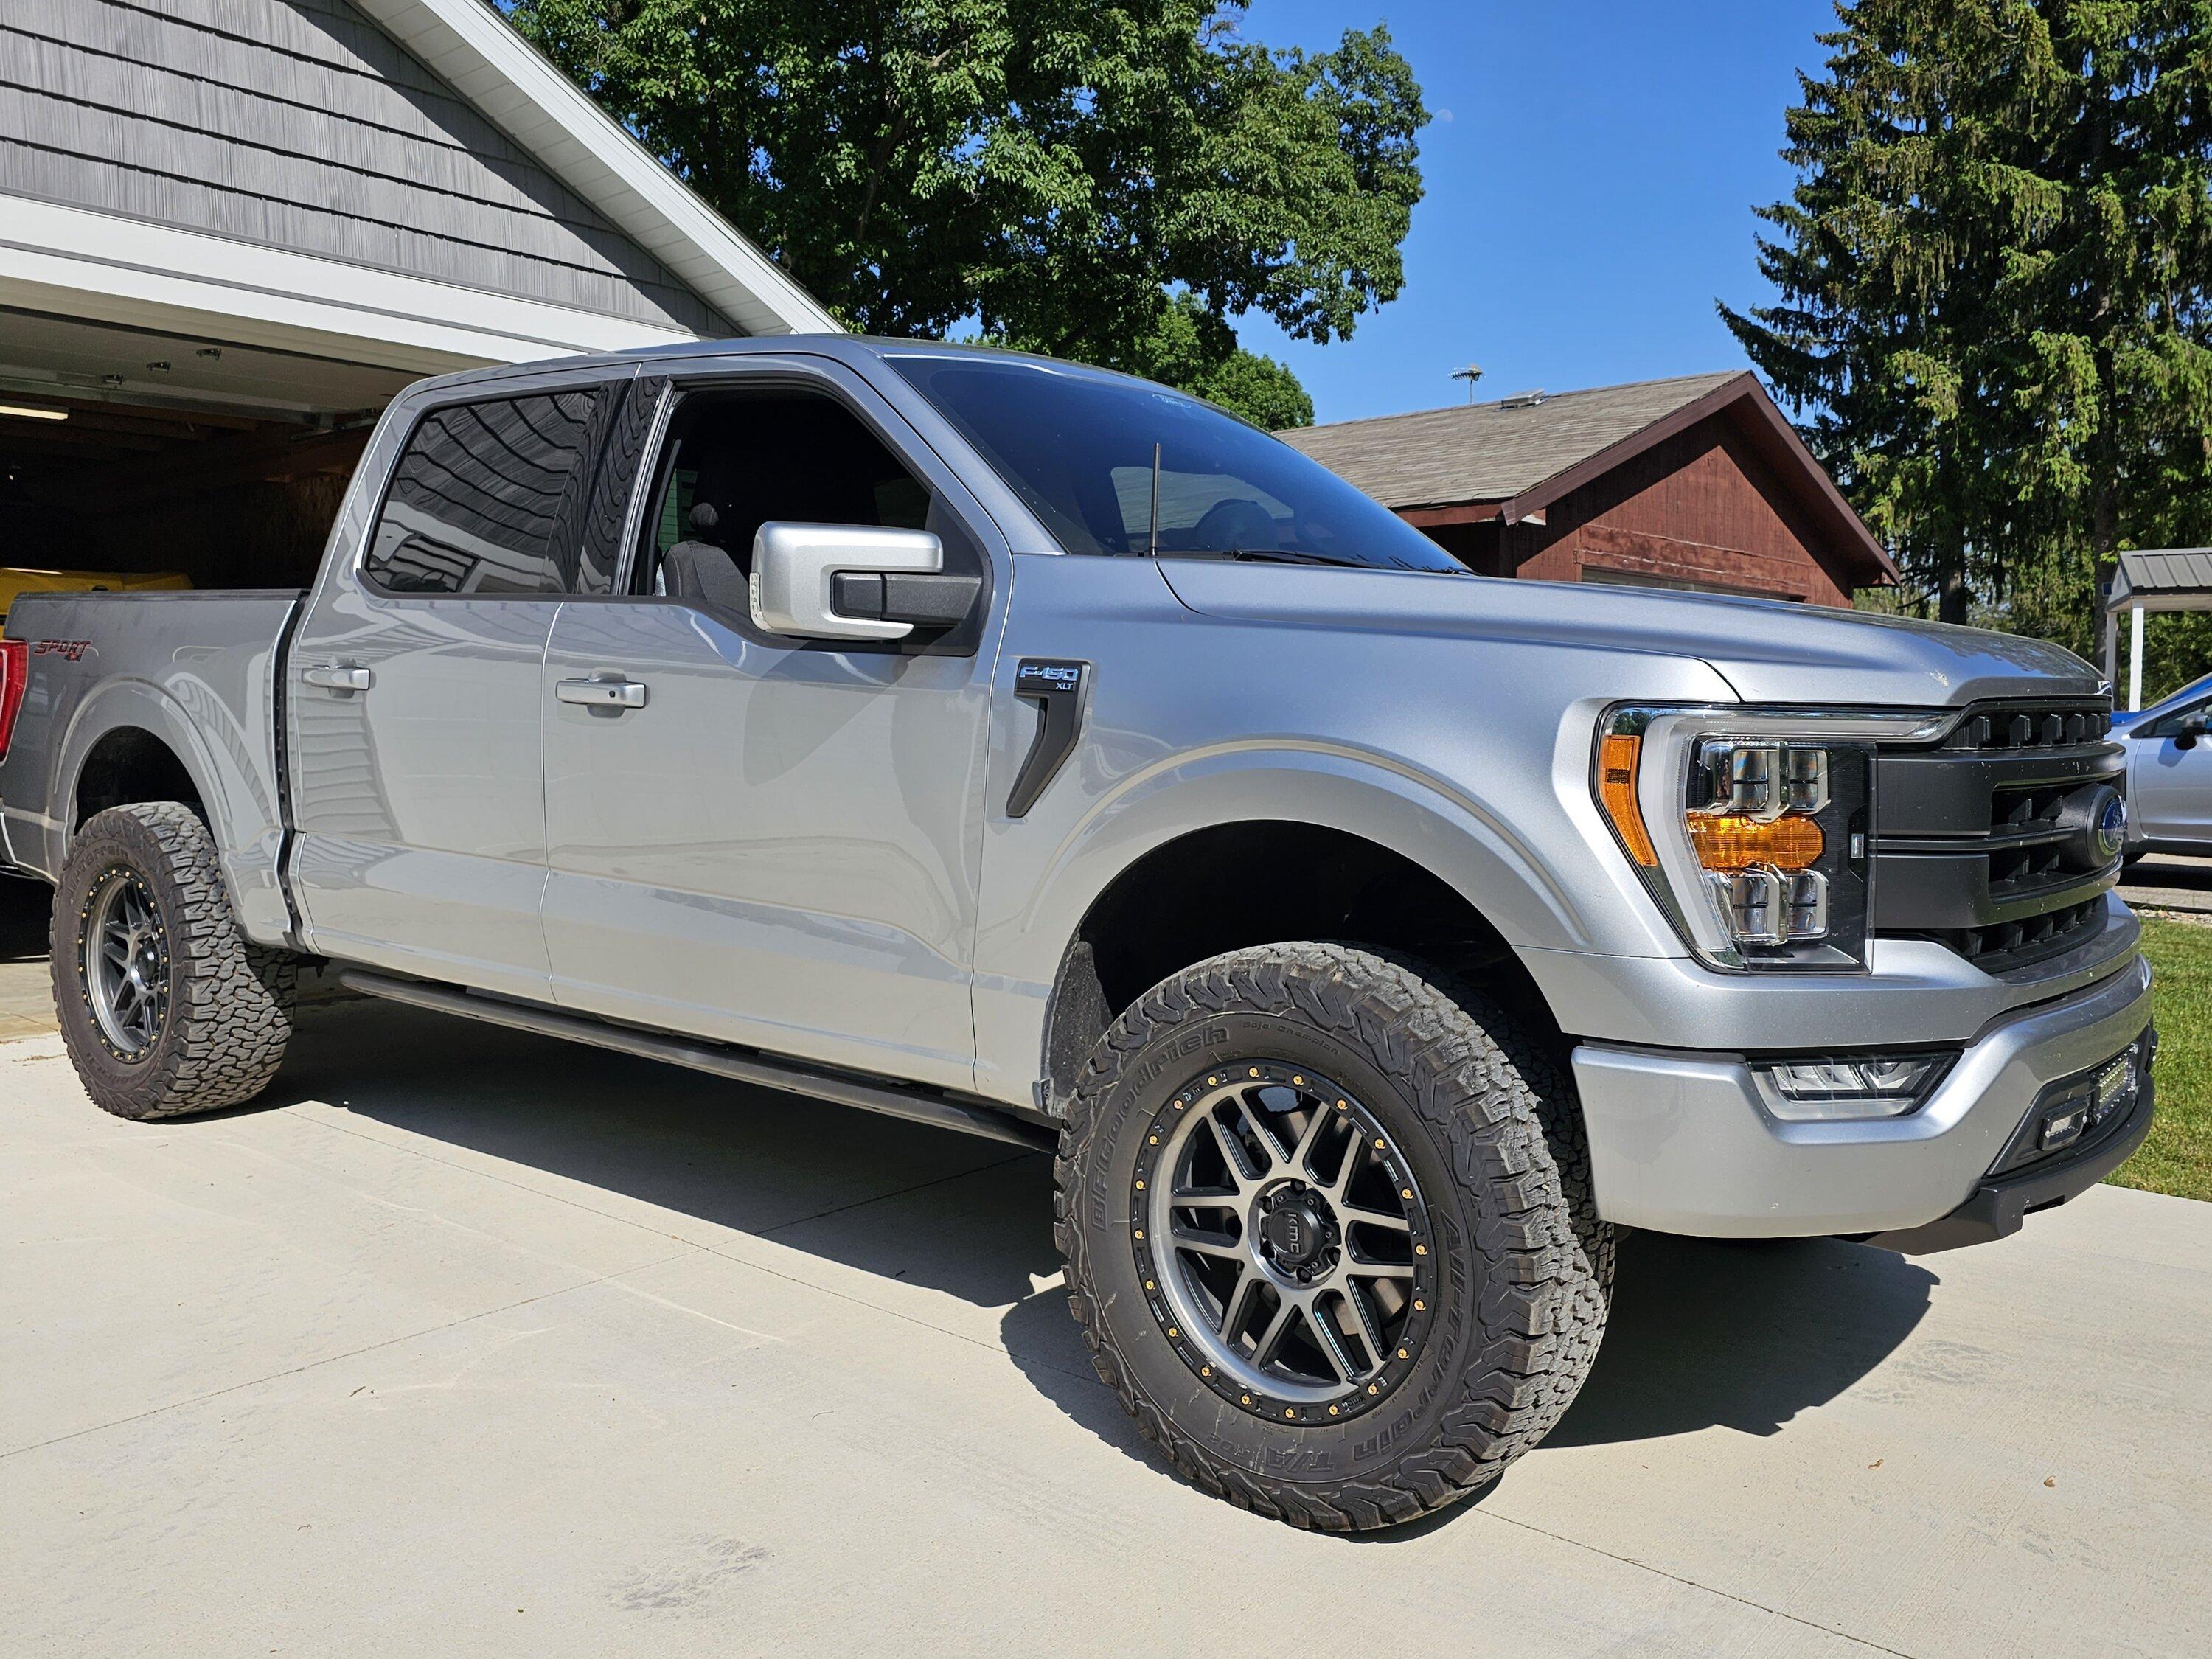 Ford F-150 2021 Iconic Silver 5.0L, 20x9 +0 and 35x12.50 KO2 tires. 3.5" ReadyLift SST leveling kit, Fox, Bilstein 20230529_170736